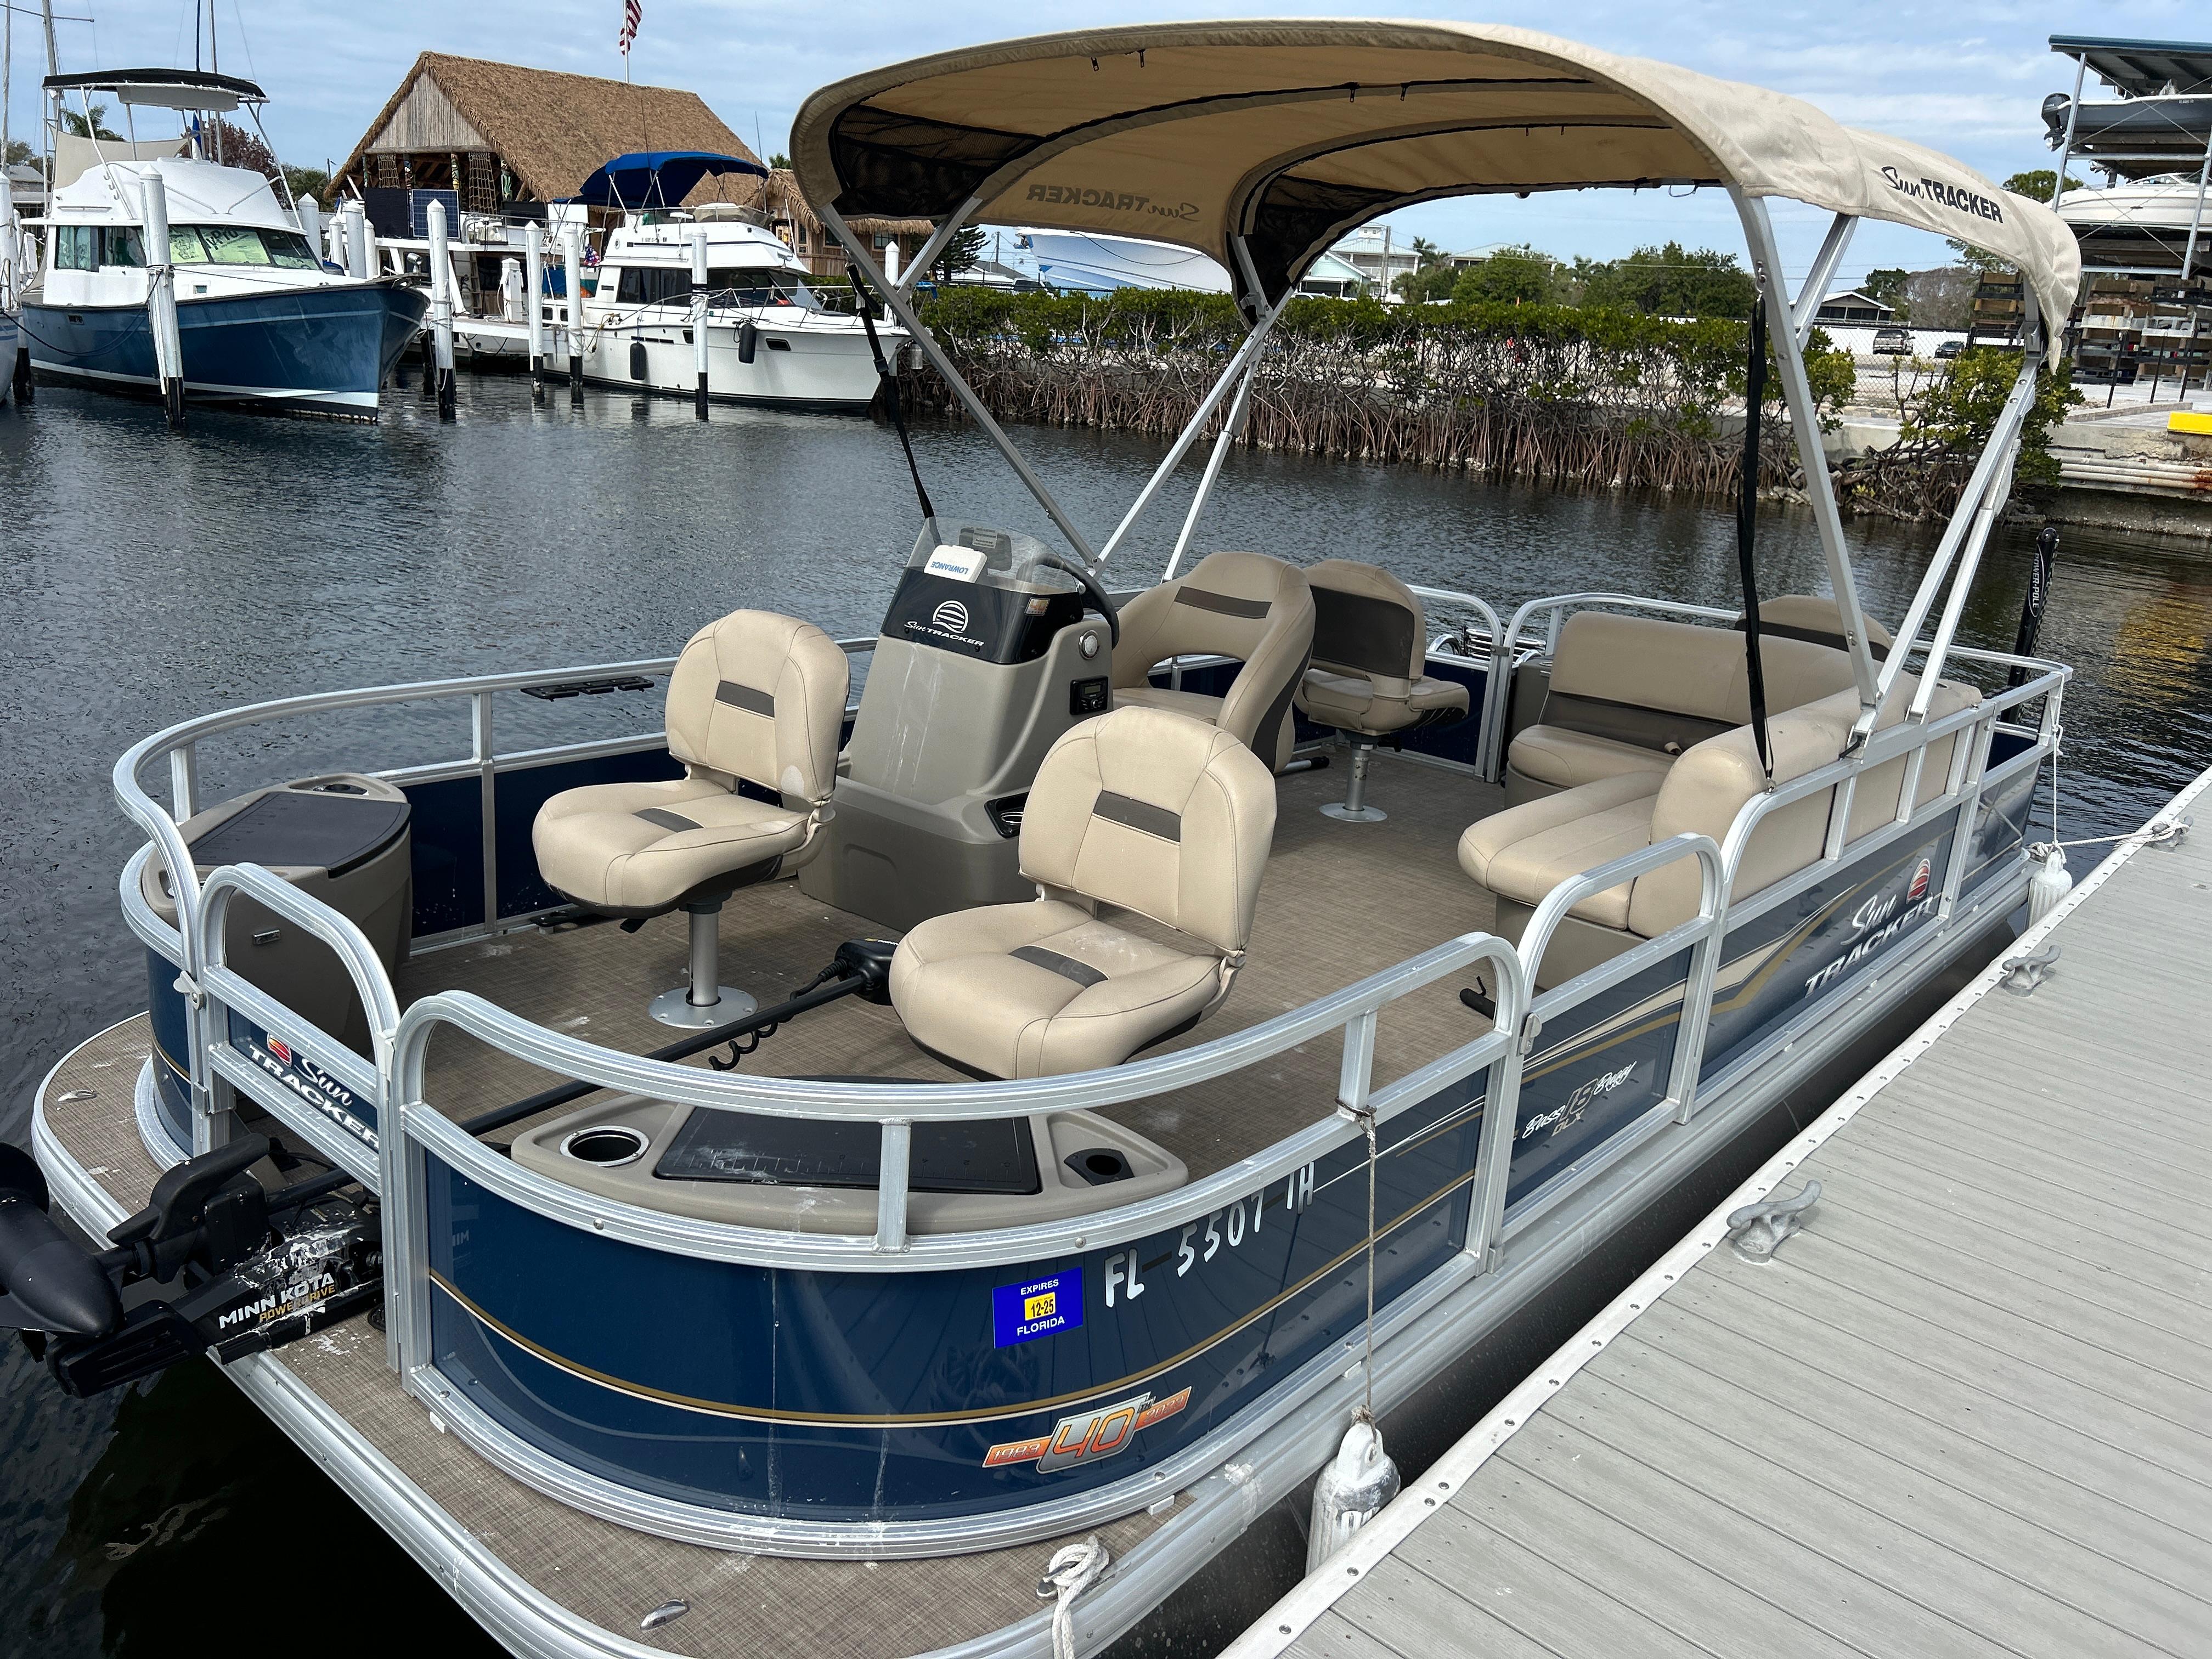 Outboard pontoon boat - PARTY BARGE® 24 DLX - Sun Tracker - 12-person max.